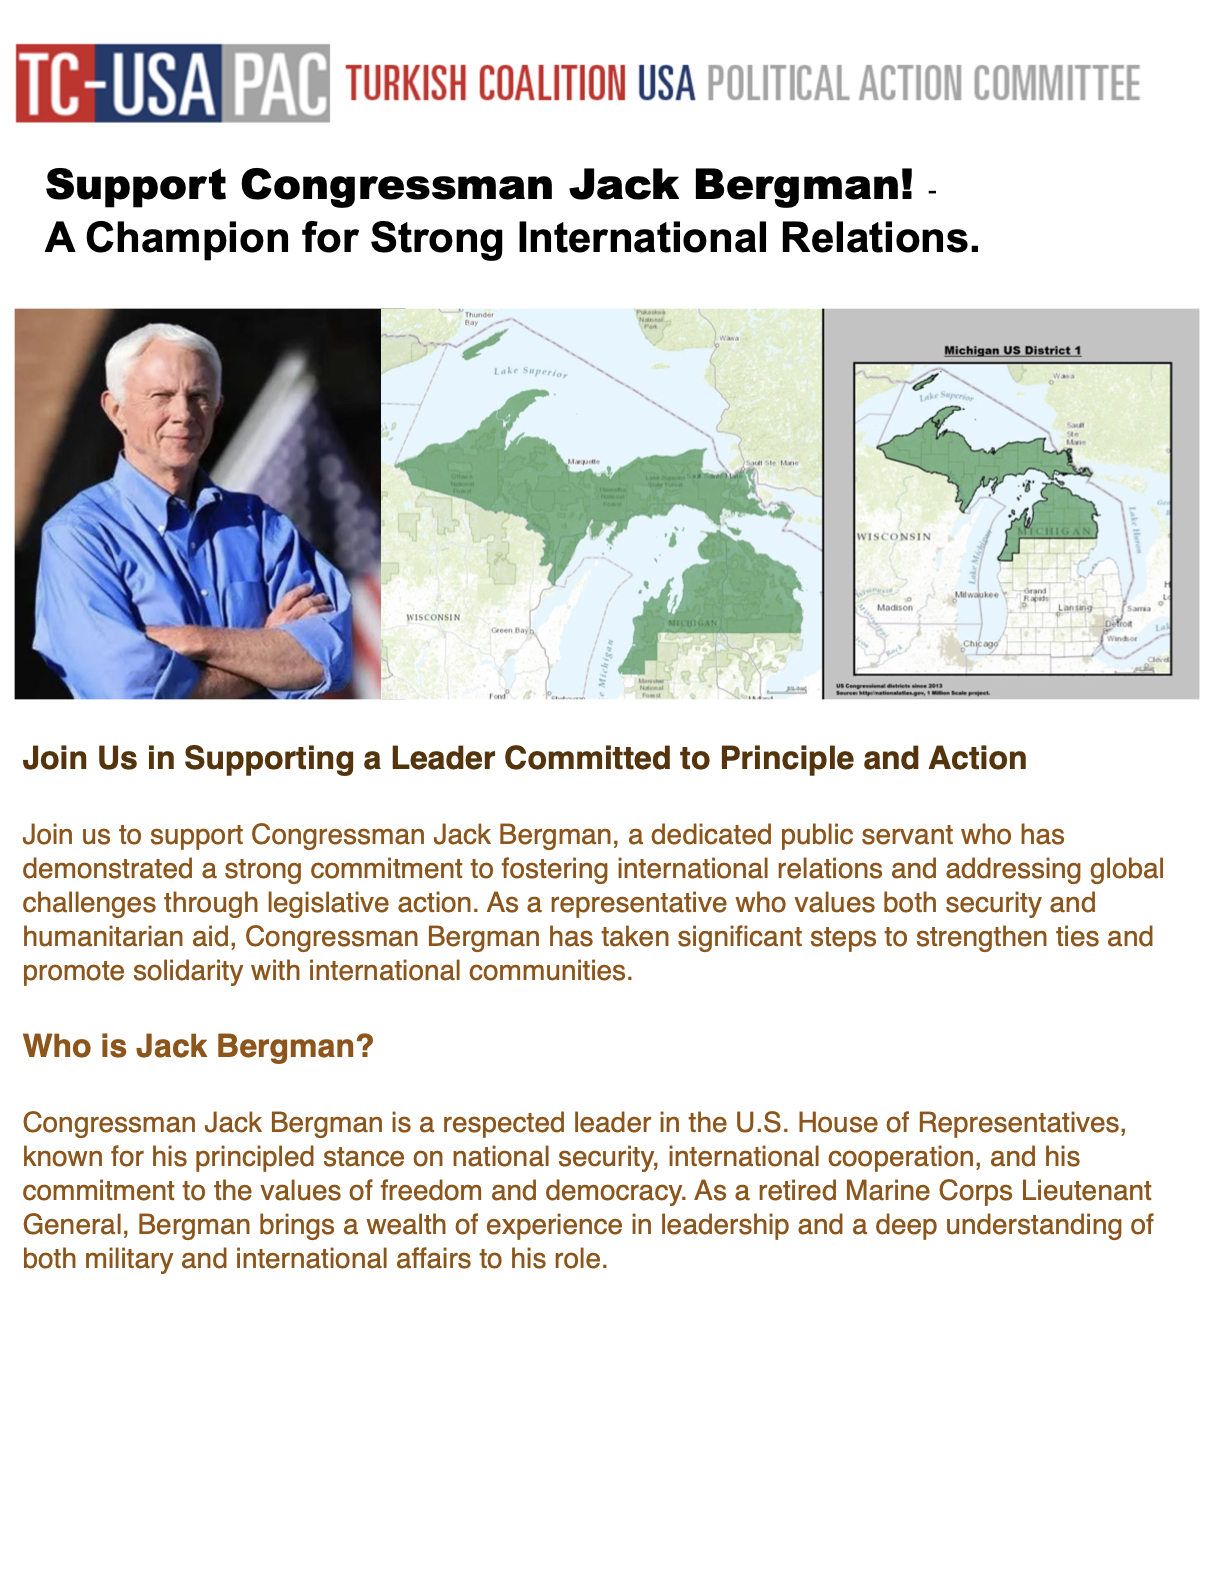 Jack Bergman - Join us to support Congressman Jack Bergman, a dedicated public servant who hasdemonstrated a strong commitment to fostering international relations and addressing global challenges through legislative action. 